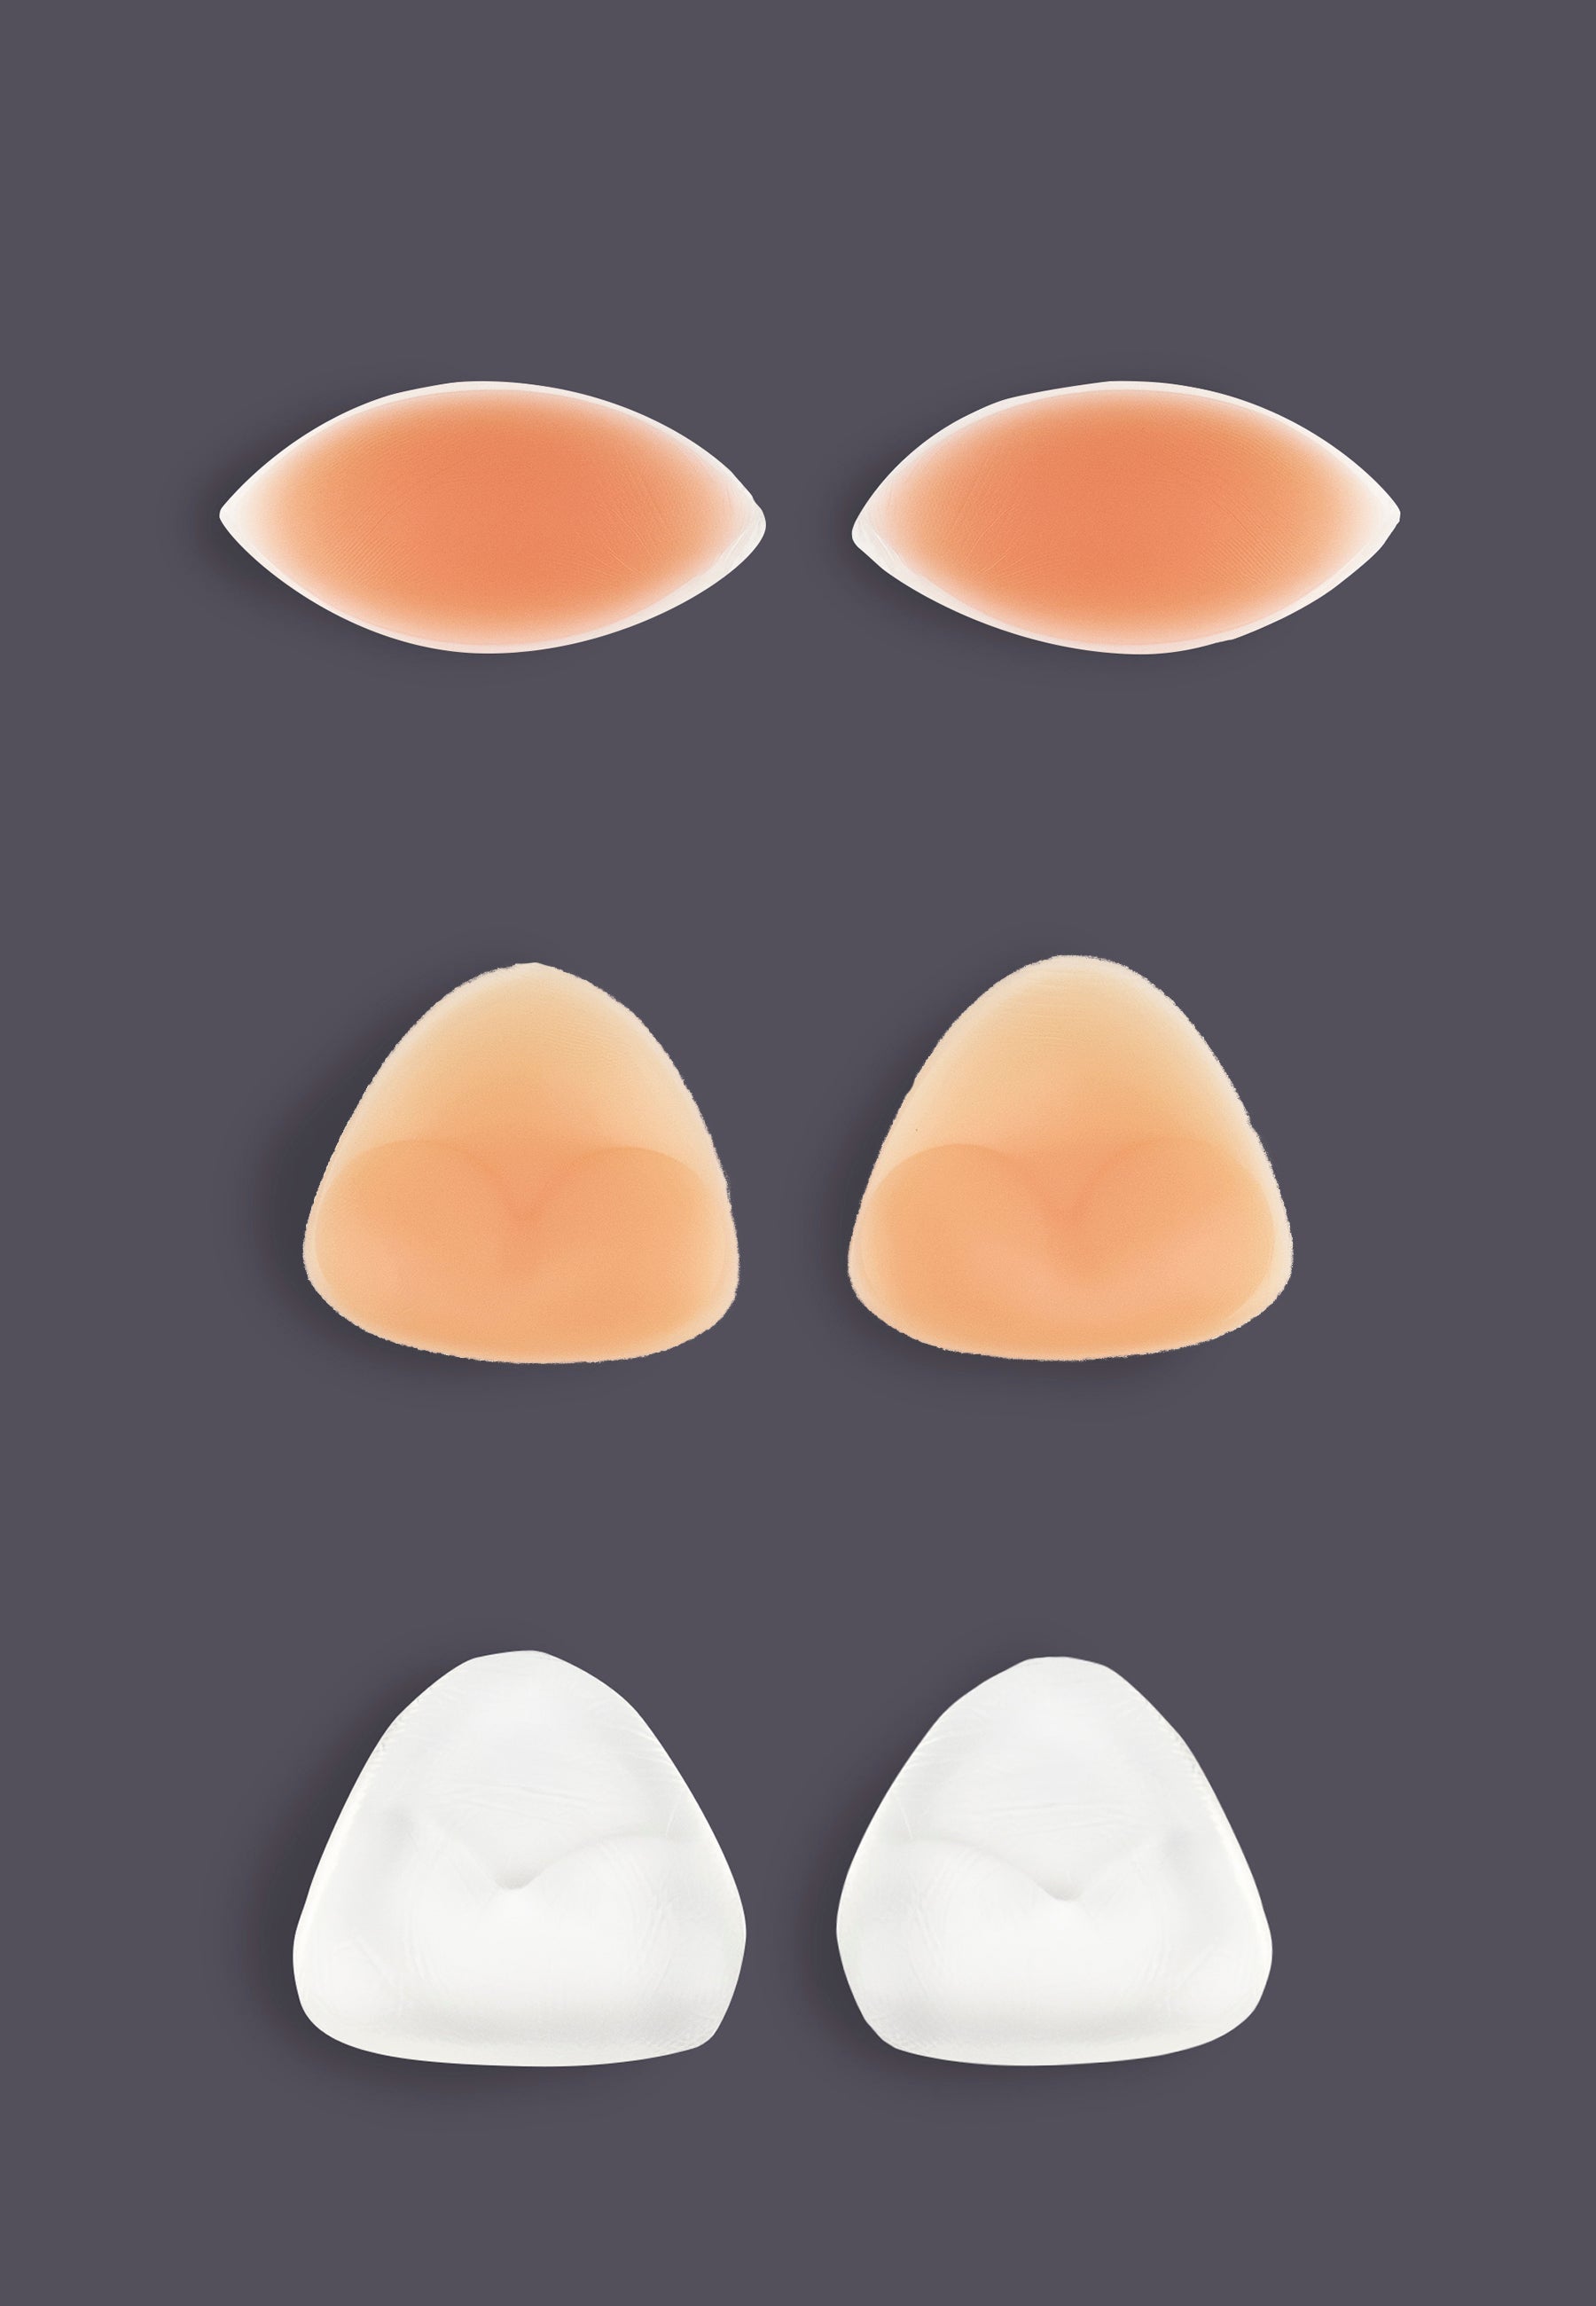 The Silicone Breastpads in oval shape, the nude ones and transparent